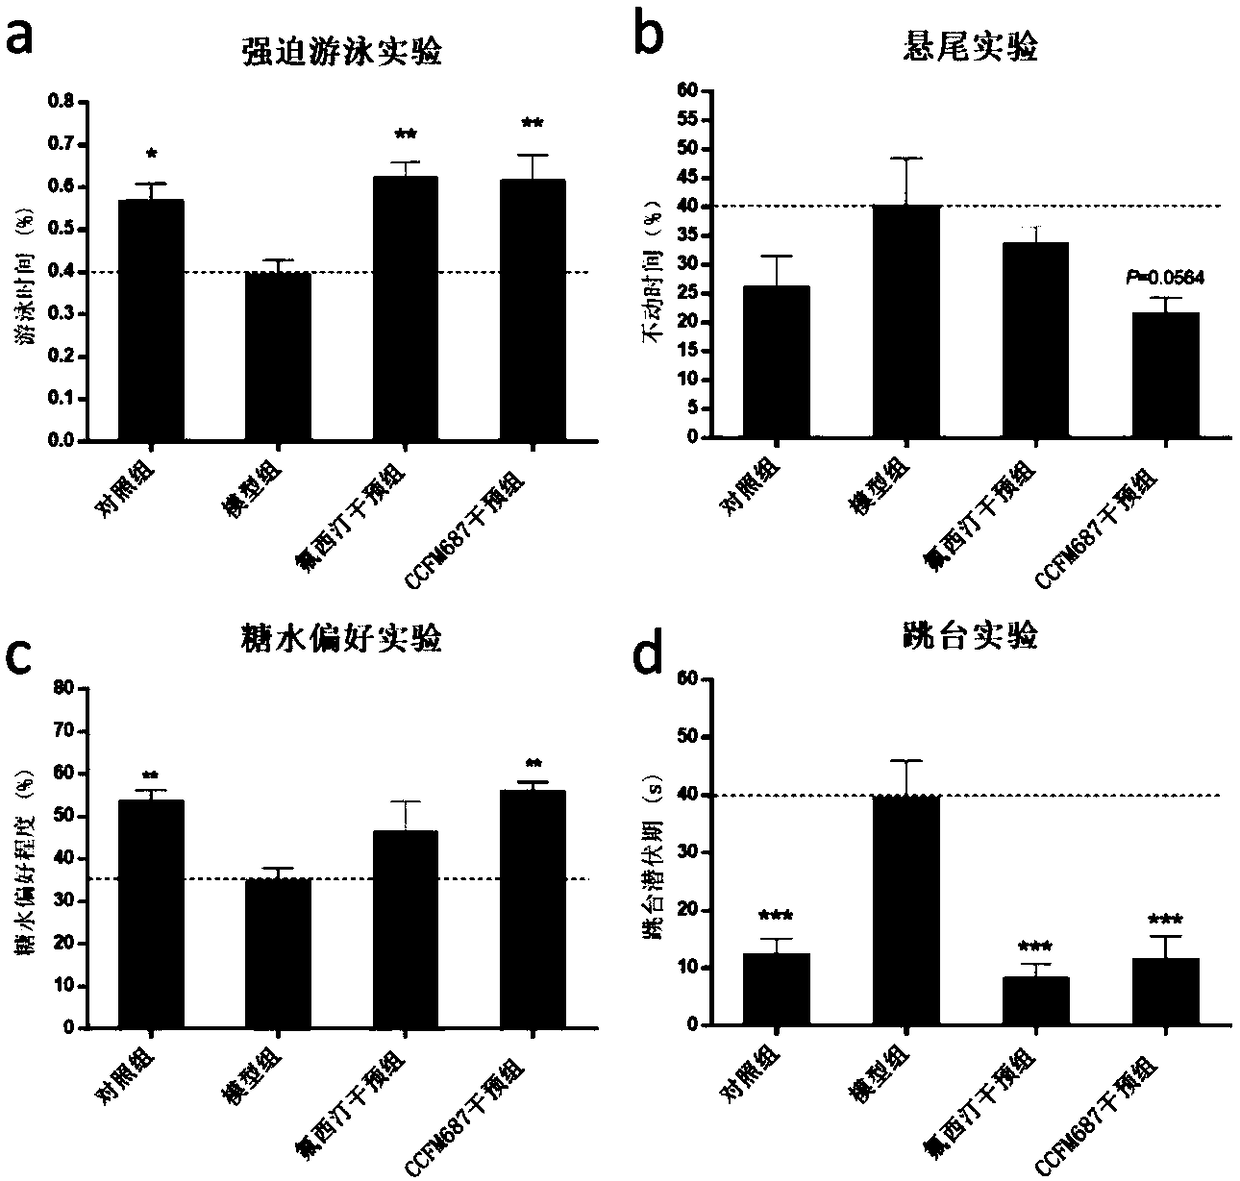 Bifidobacterium longum subsp. infantis CCFM687 as well as fermented food and application thereof